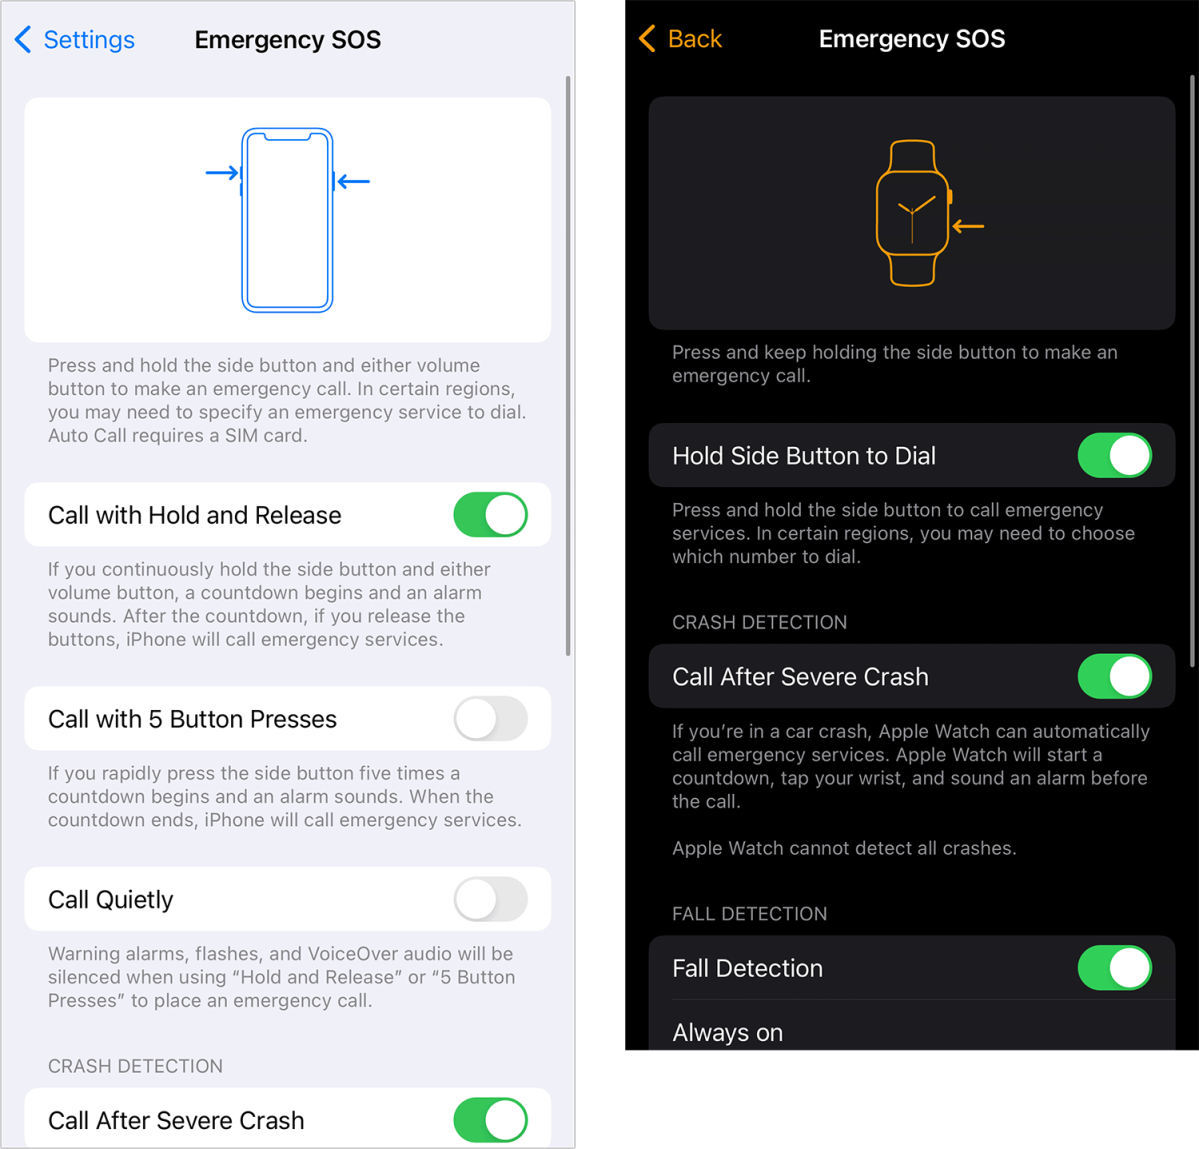 How to tweak your Emergency SOS settings to match your intent | Macworld